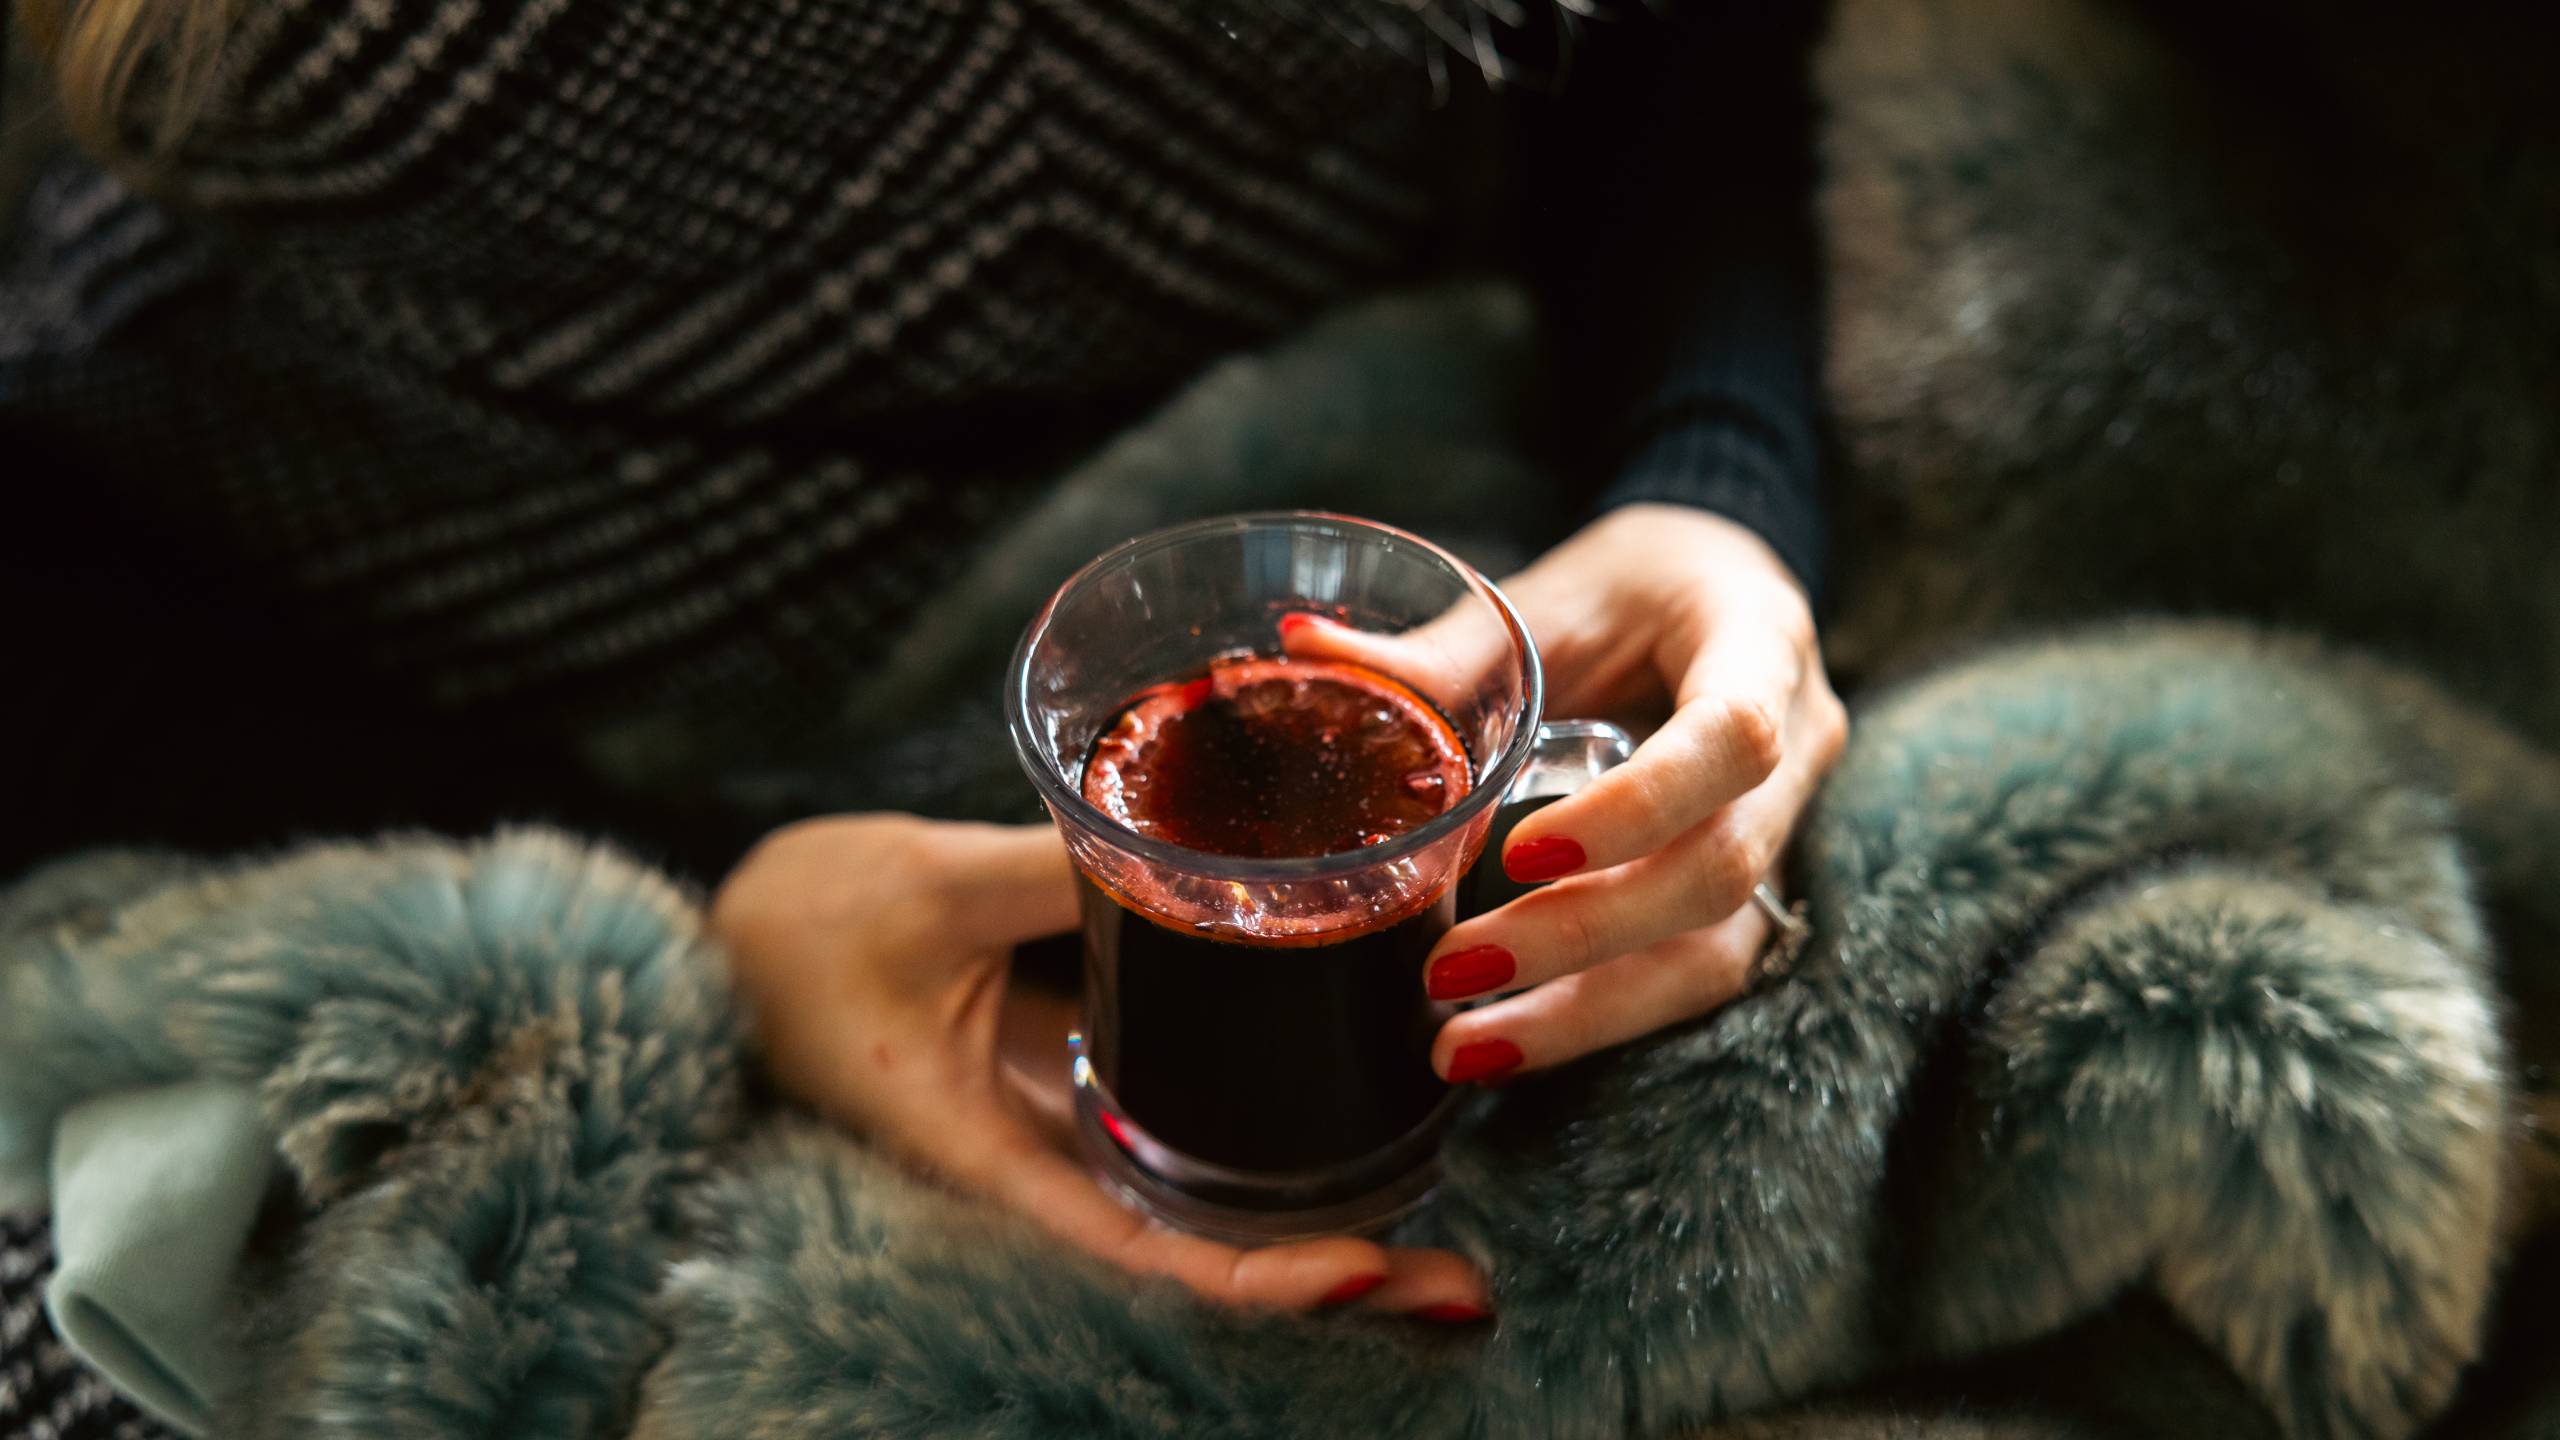 Woman enjoying a glass of mulled wine on the sofa to represent Christmas mulled wine recipe